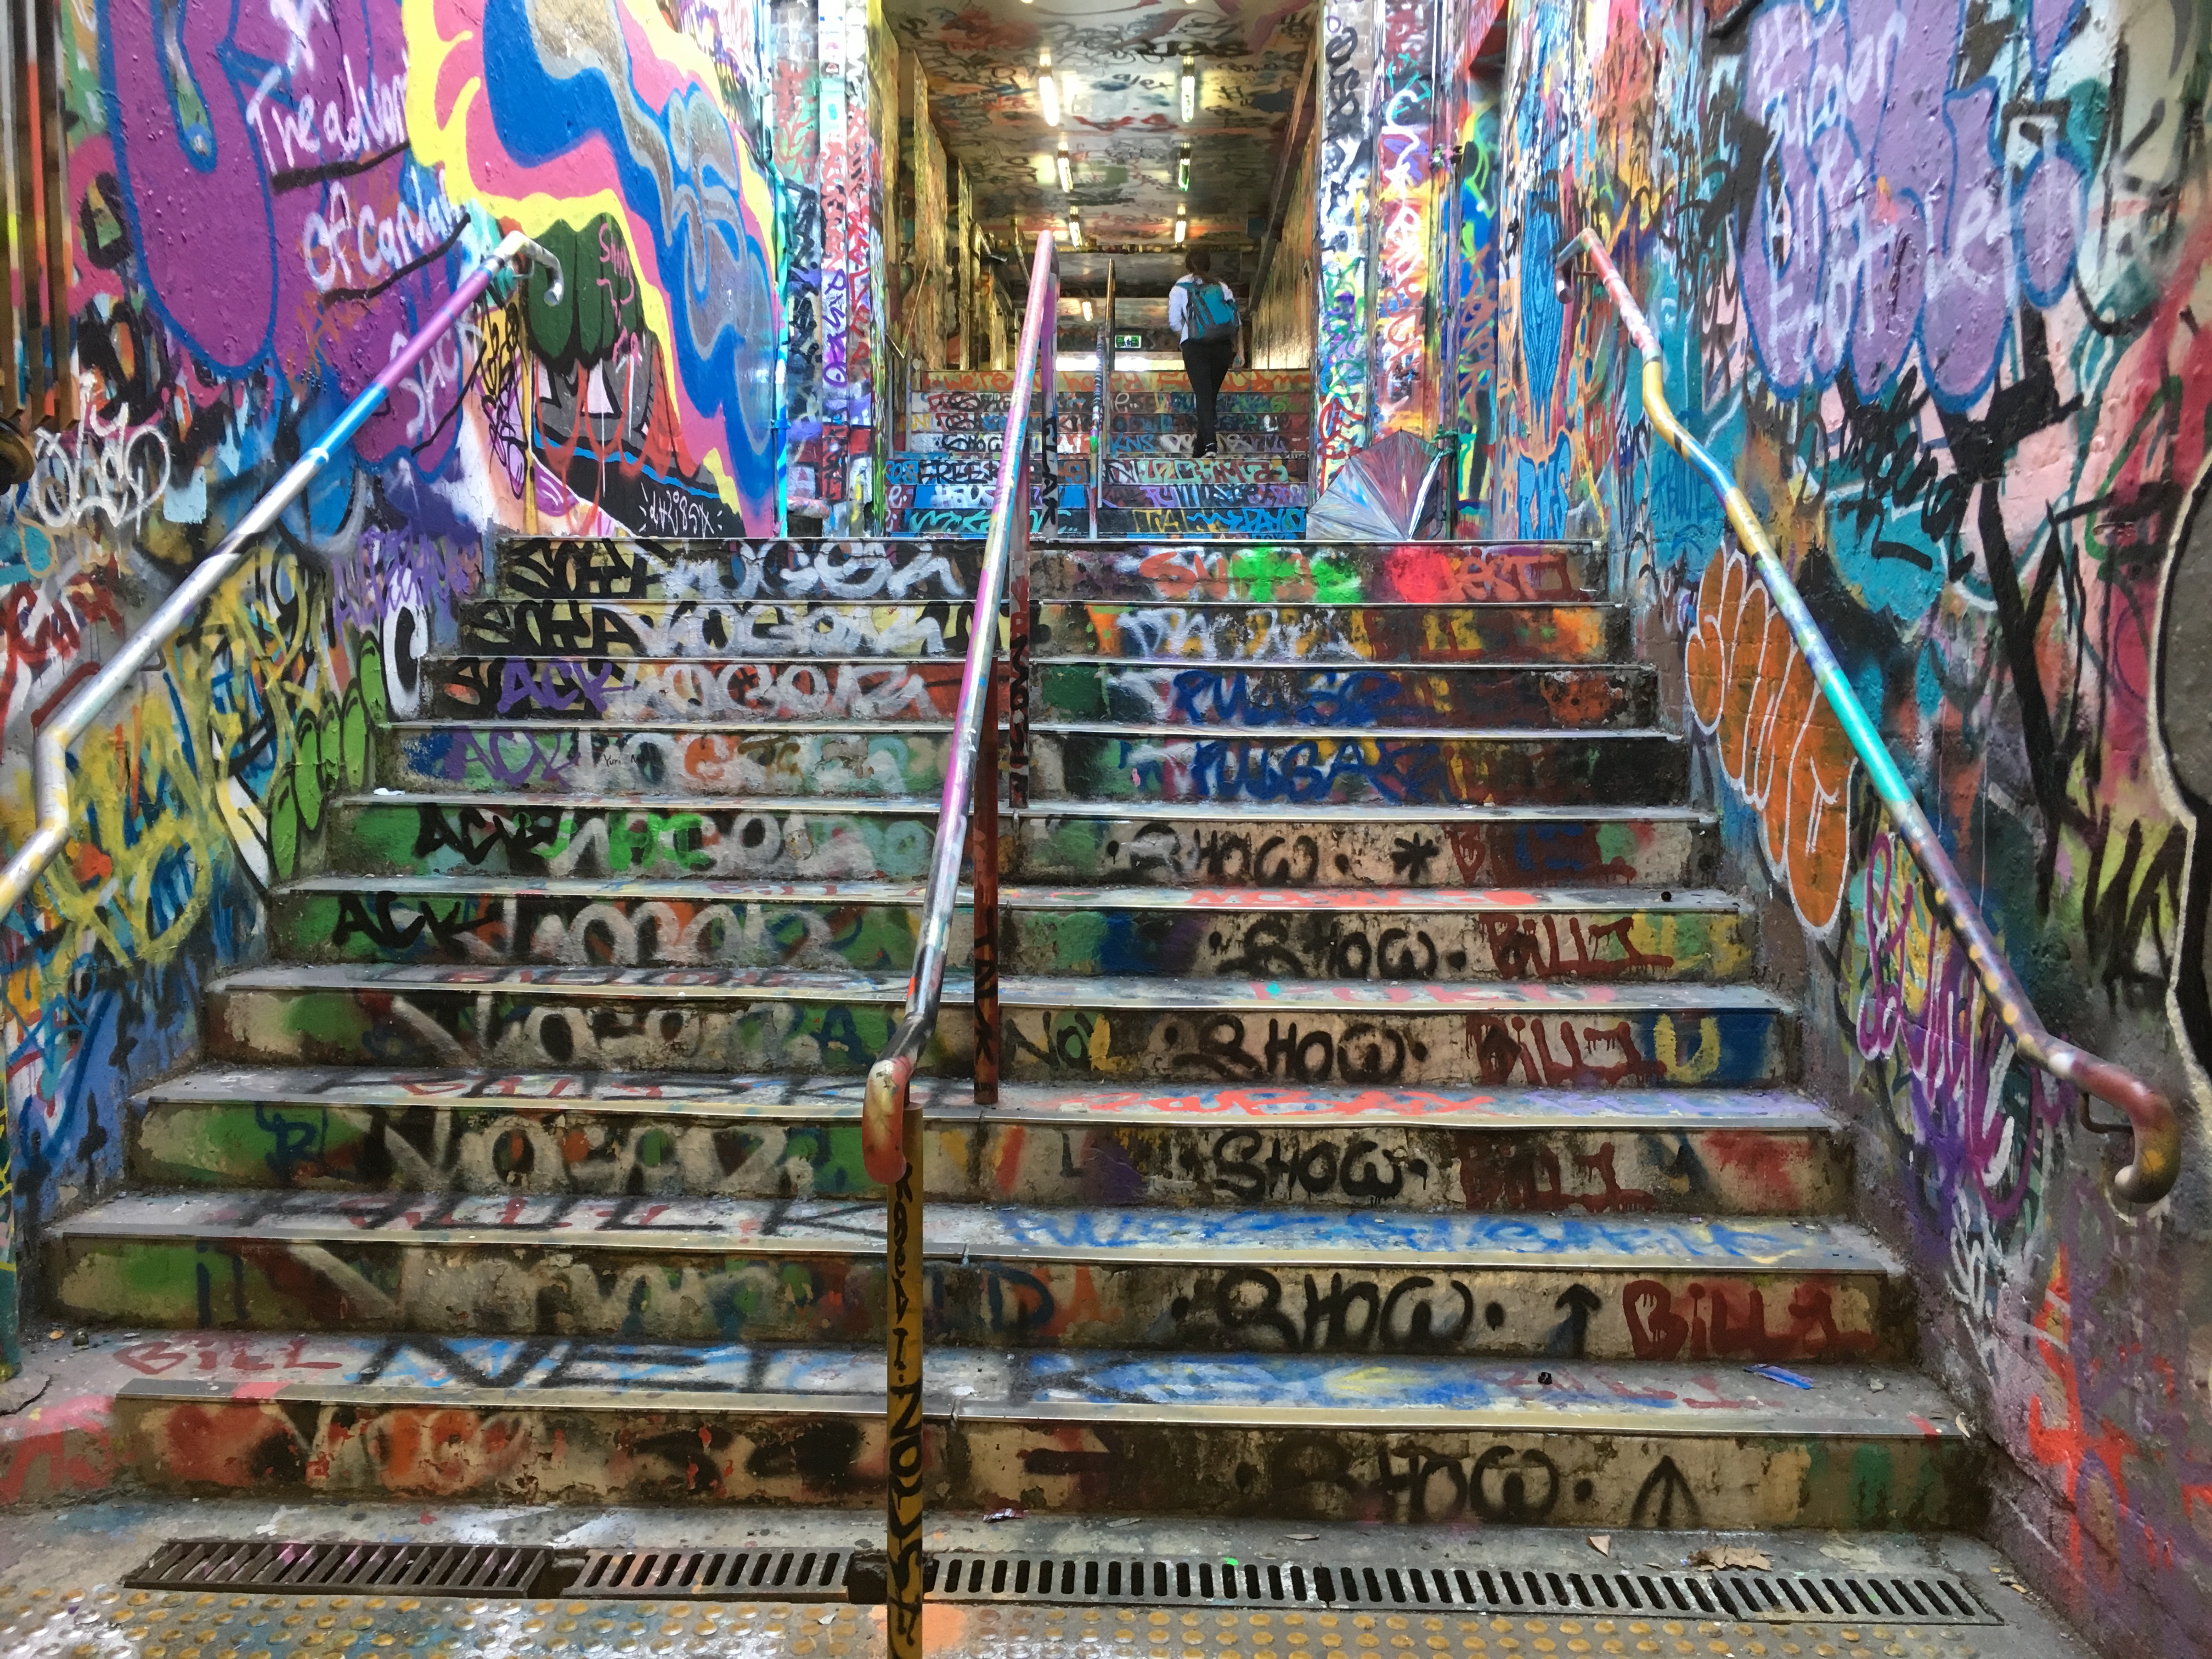 Stairs inside the graffiti tunnel